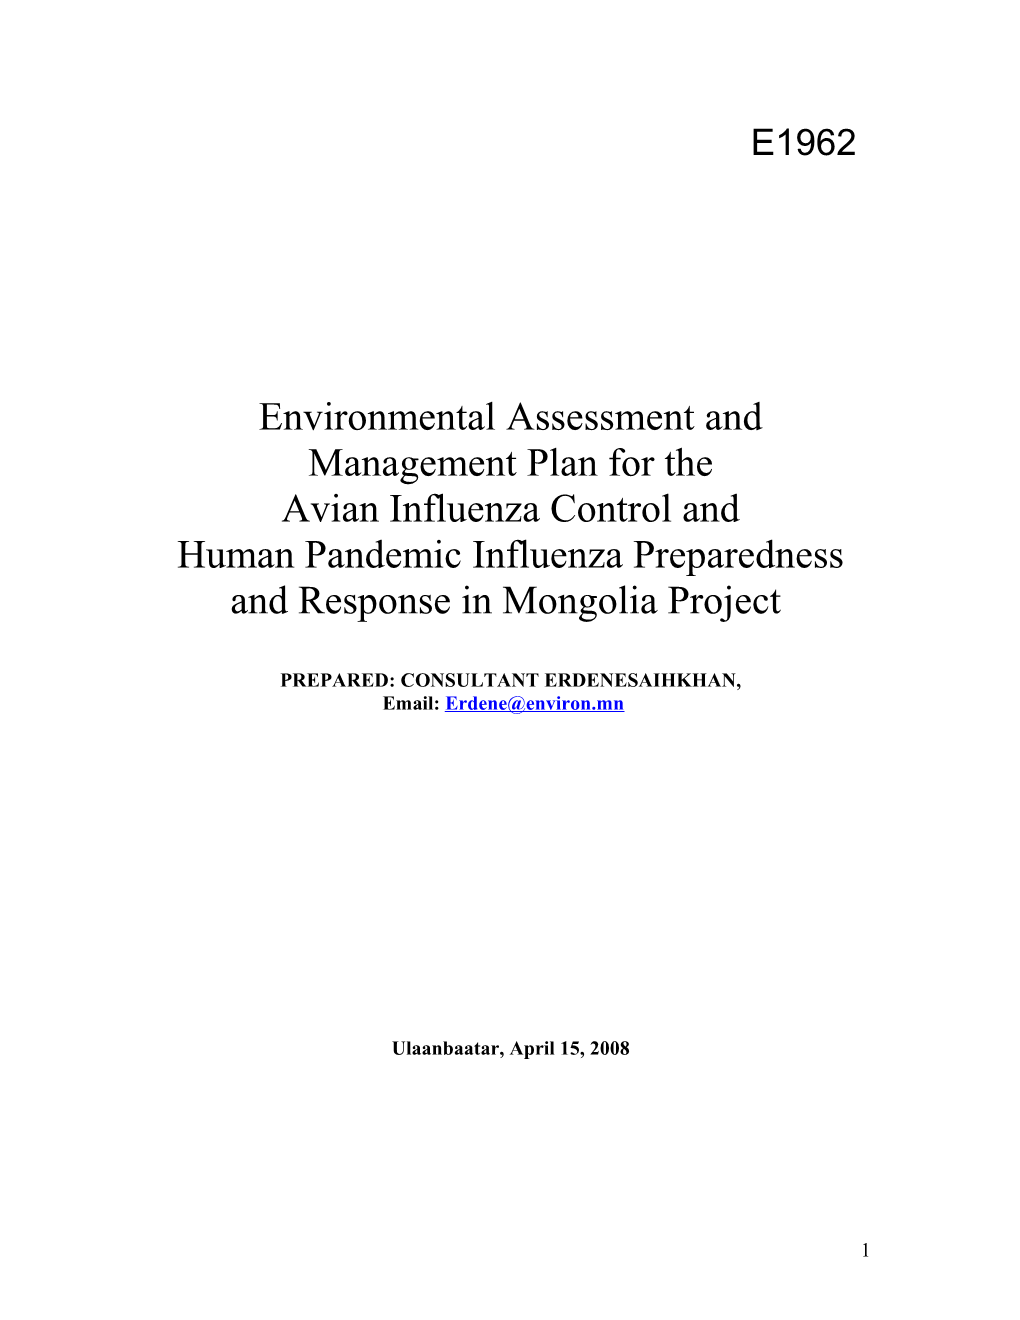 Environmental Assessment And